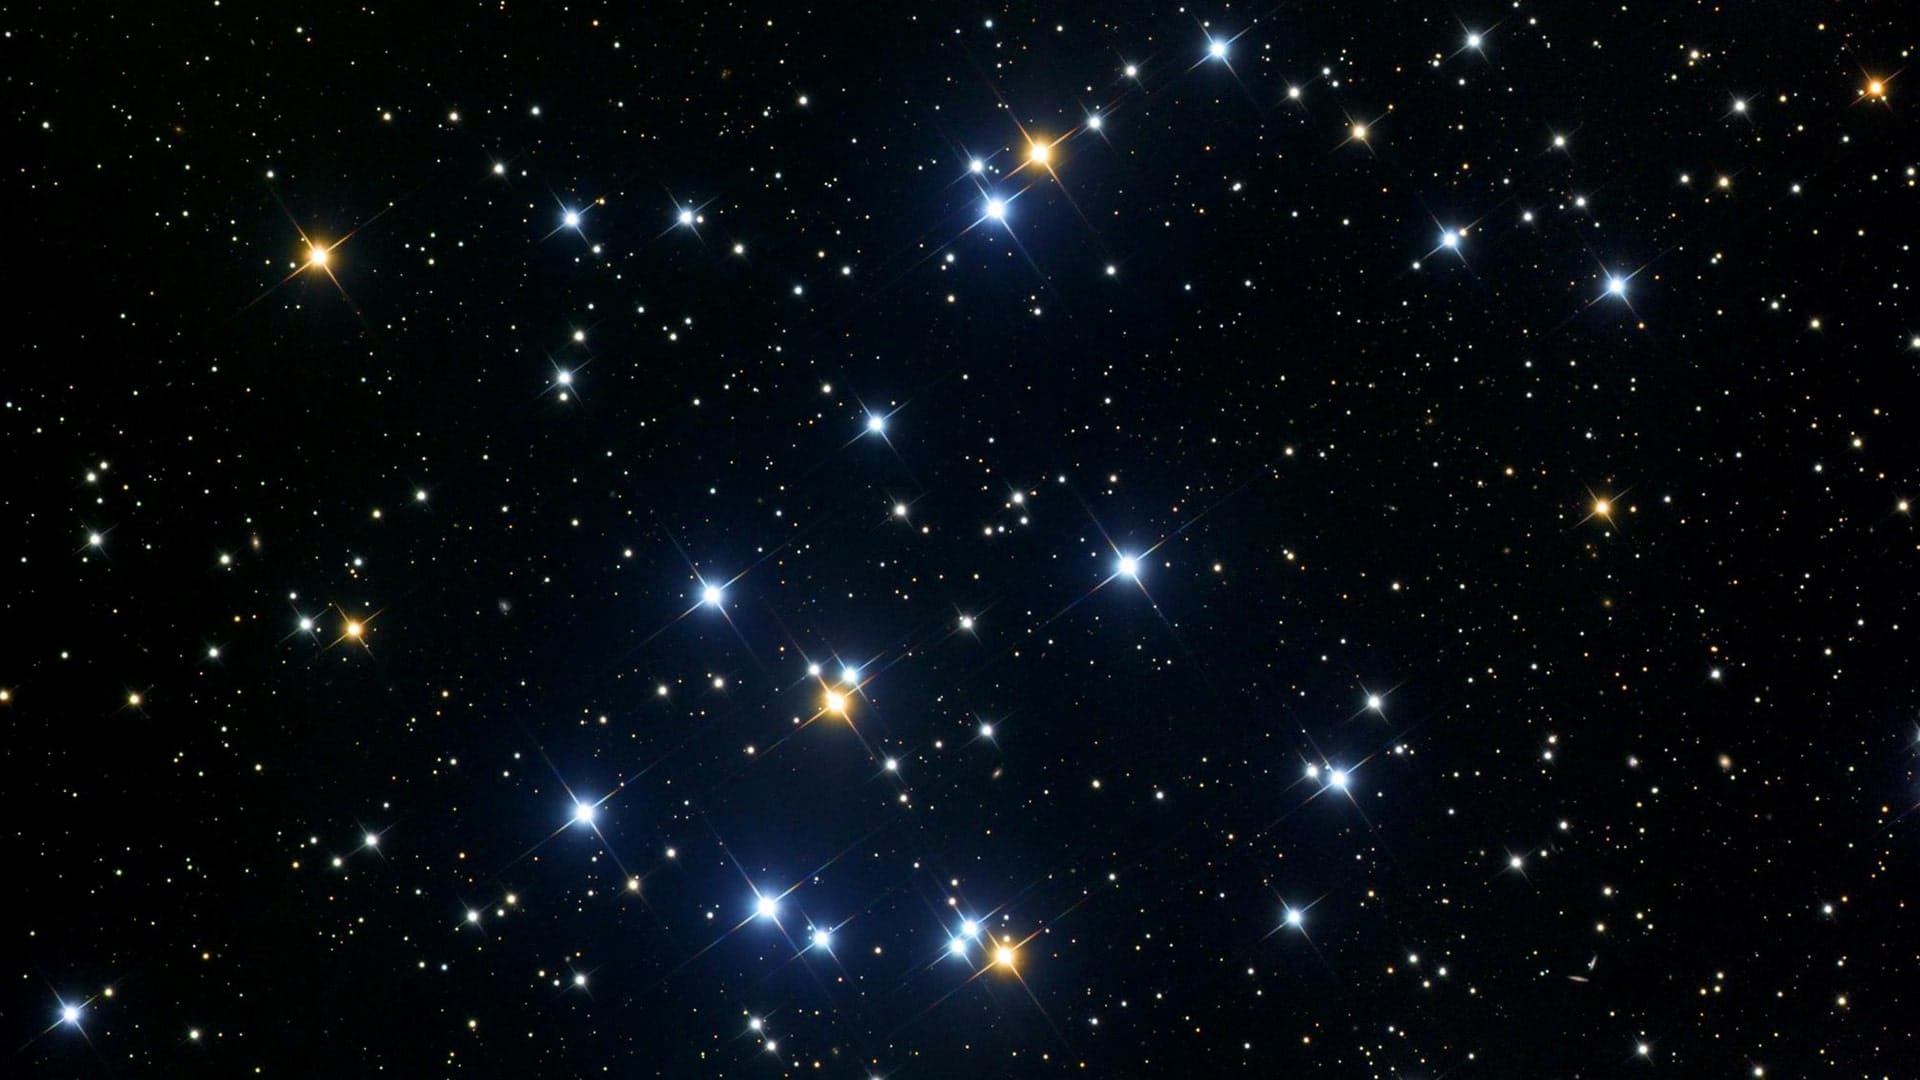 Beehive Cluster (M44)